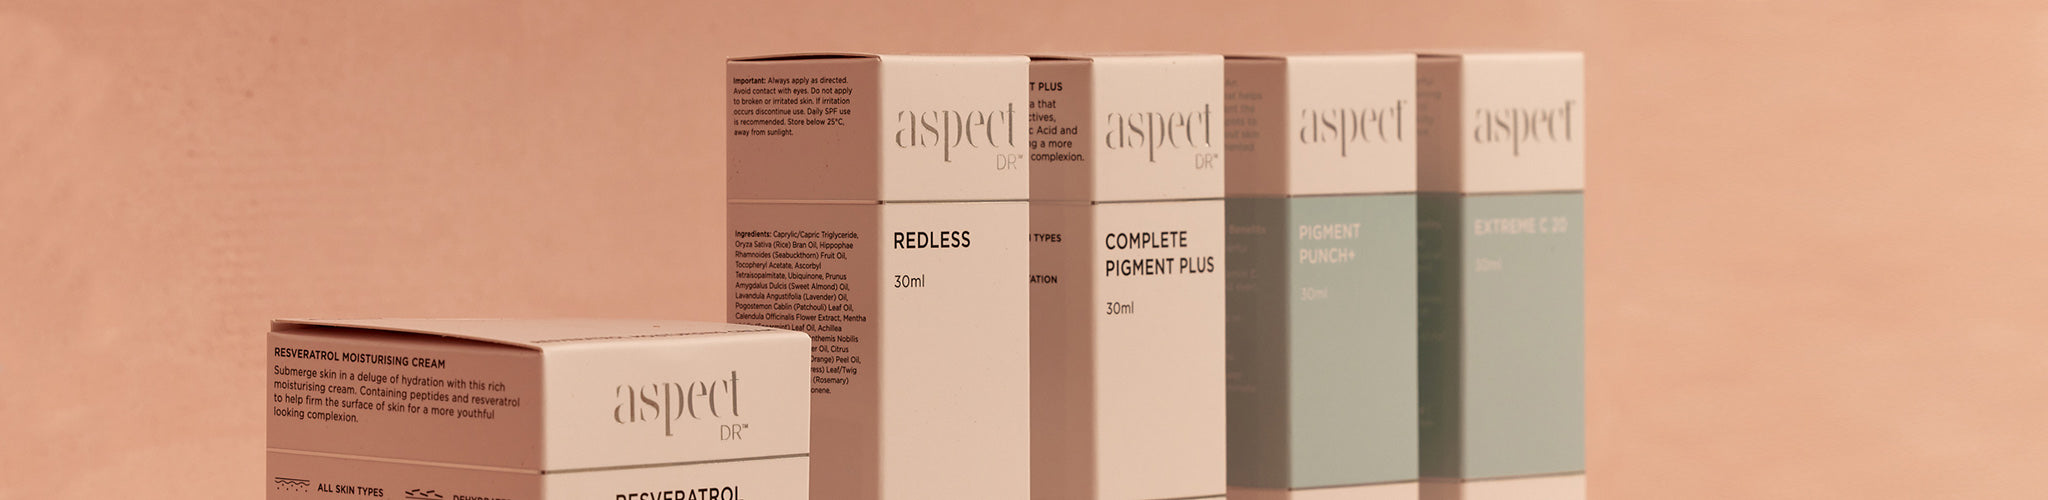 Aspect + Aspect Dr Collection Header